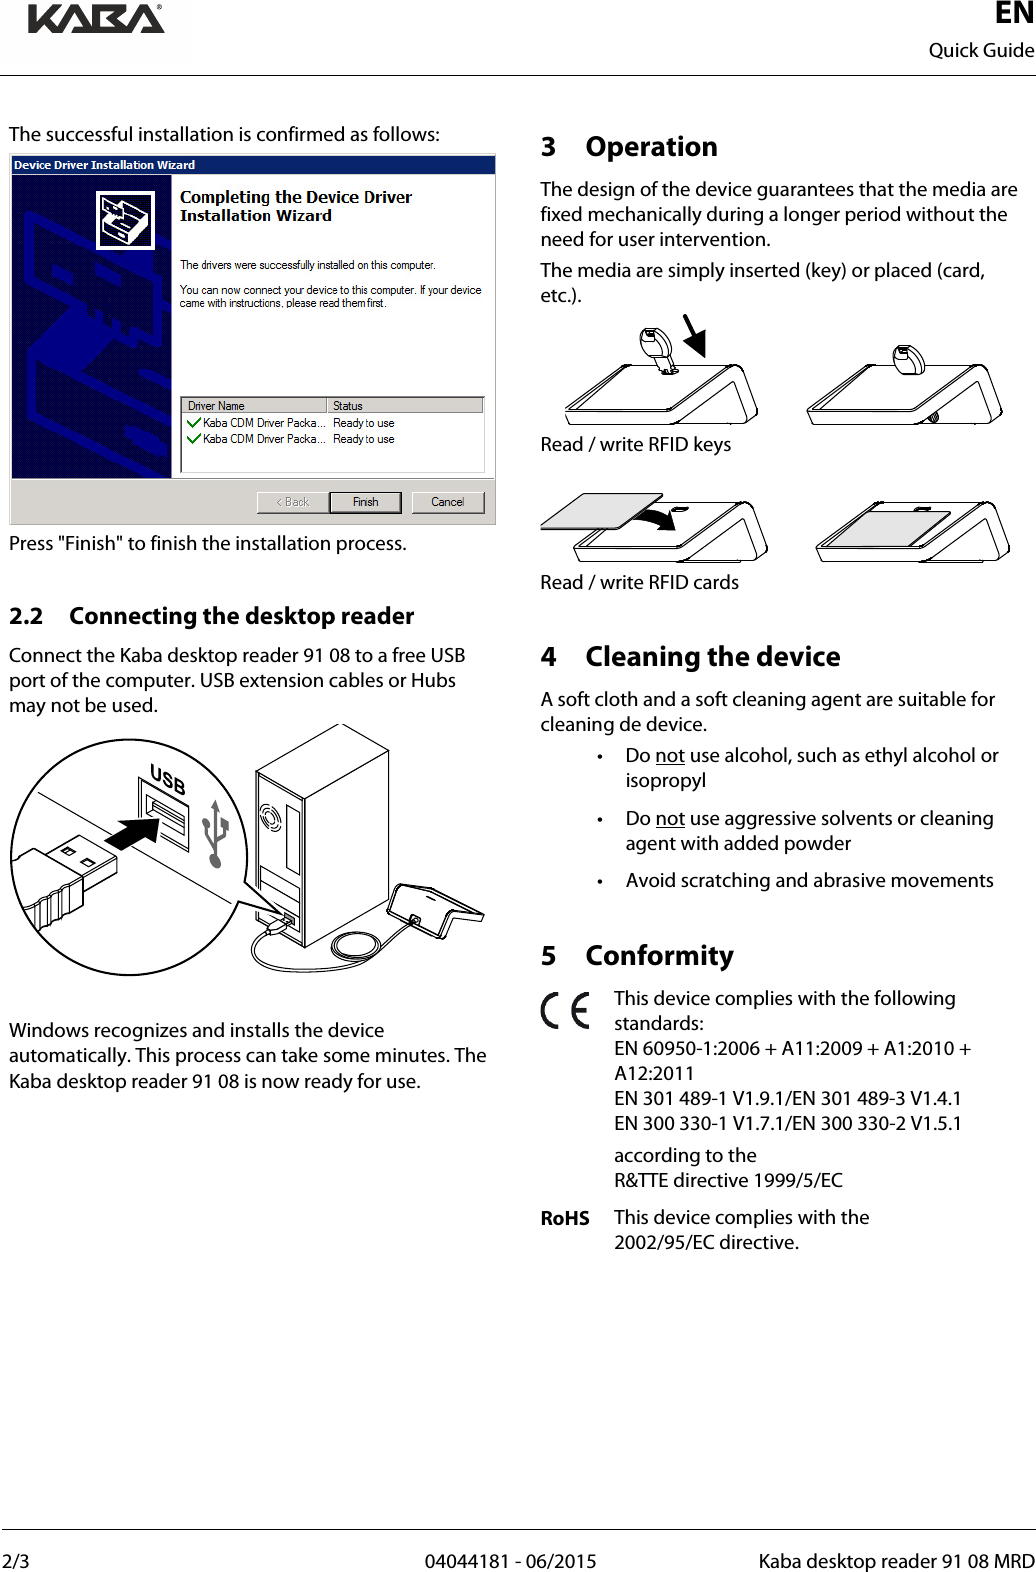  EN Quick Guide  2/3  04044181 - 06/2015 Kaba desktop reader 91 08 MRD   The successful installation is confirmed as follows:  Press &quot;Finish&quot; to finish the installation process.  2.2 Connecting the desktop reader Connect the Kaba desktop reader 91 08 to a free USB port of the computer. USB extension cables or Hubs may not be used.   Windows recognizes and installs the device automatically. This process can take some minutes. The Kaba desktop reader 91 08 is now ready for use.   3 Operation The design of the device guarantees that the media are fixed mechanically during a longer period without the need for user intervention. The media are simply inserted (key) or placed (card, etc.).  Read / write RFID keys   Read / write RFID cards  4 Cleaning the device A soft cloth and a soft cleaning agent are suitable for cleaning de device. • Do not use alcohol, such as ethyl alcohol or isopropyl • Do not use aggressive solvents or cleaning agent with added powder • Avoid scratching and abrasive movements  5 Conformity  This device complies with the following standards: EN 60950-1:2006 + A11:2009 + A1:2010 + A12:2011 EN 301 489-1 V1.9.1/EN 301 489-3 V1.4.1 EN 300 330-1 V1.7.1/EN 300 330-2 V1.5.1  according to the  R&amp;TTE directive 1999/5/EC RoHS This device complies with the  2002/95/EC directive.      